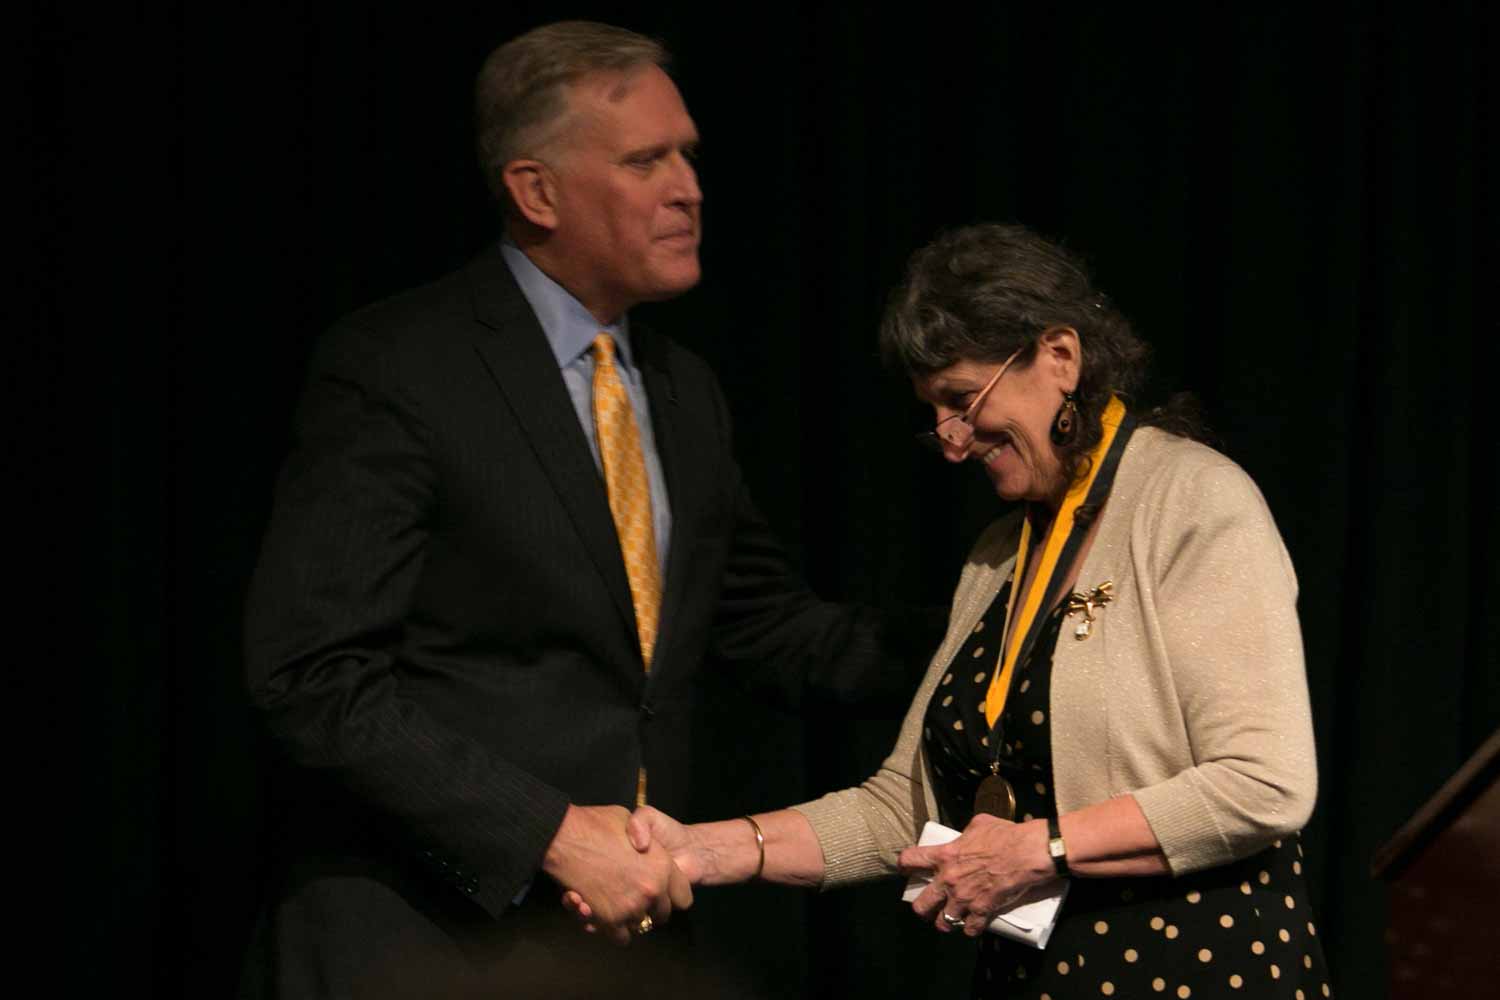 Merrill Perlman shakes Dean David Kurpius's hand after receiving her honor medal. In 1983, Perlman was hired as a Business copy editor at The New York Times, later becoming Metro copy desk chief (twice), night Metro editor, an editor on the Week in Review, recruiting editor for copy desks and managing editor of The New York Times News Service. In 2004, she was named director of copy desks, in charge of the 160-plus copy editors across the newsroom.